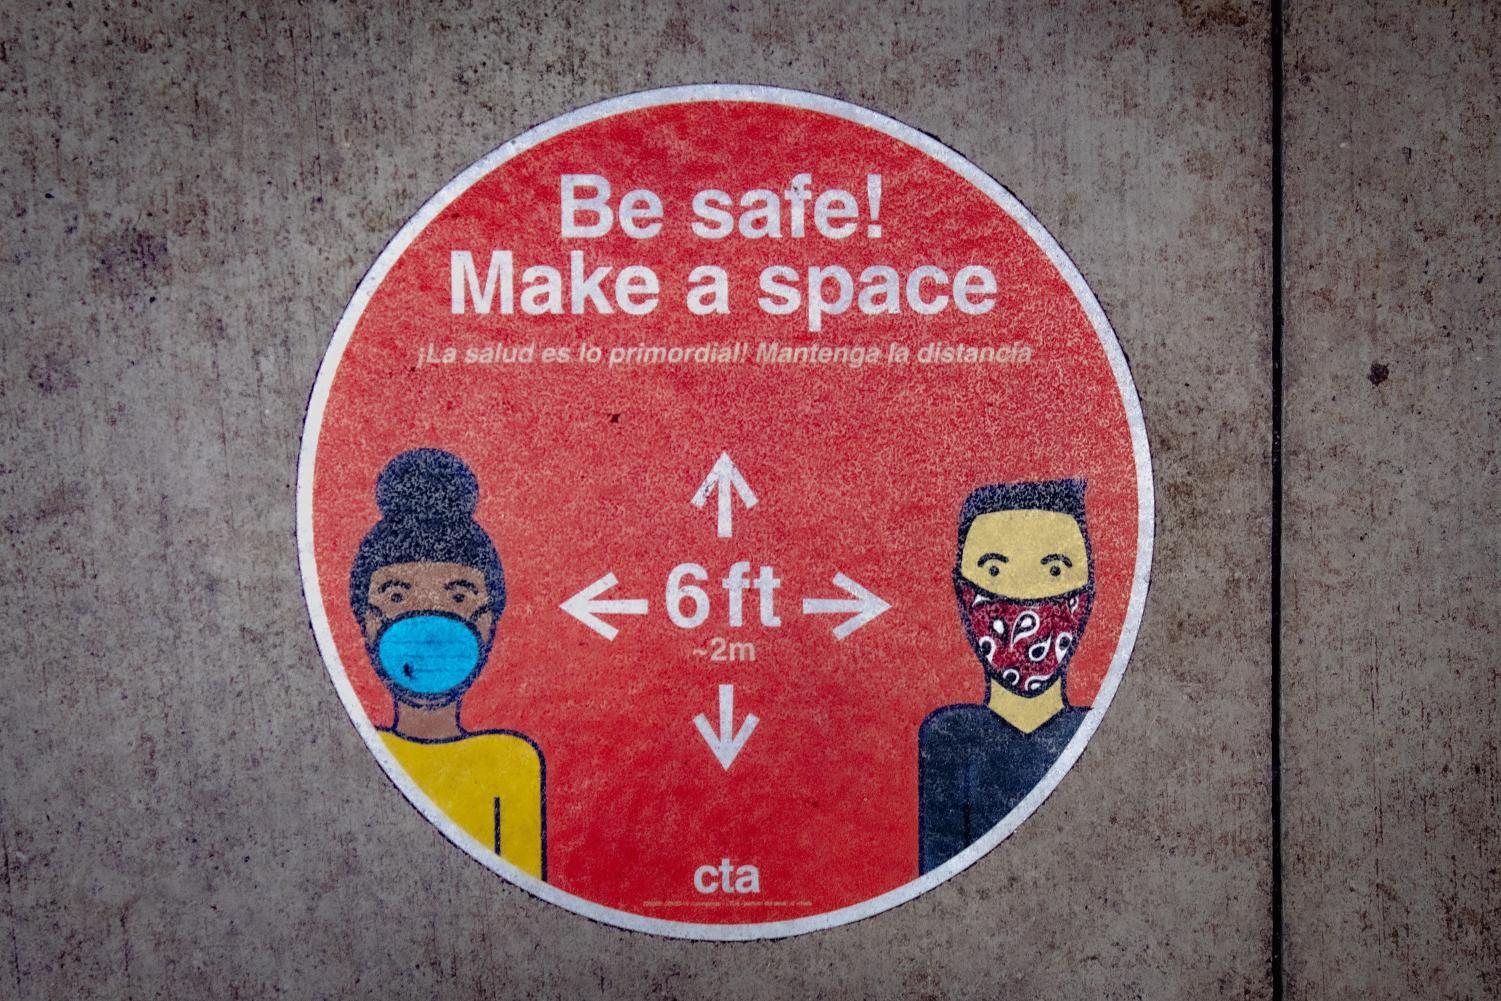 A social distancing sign telling people to "be safe! make space"